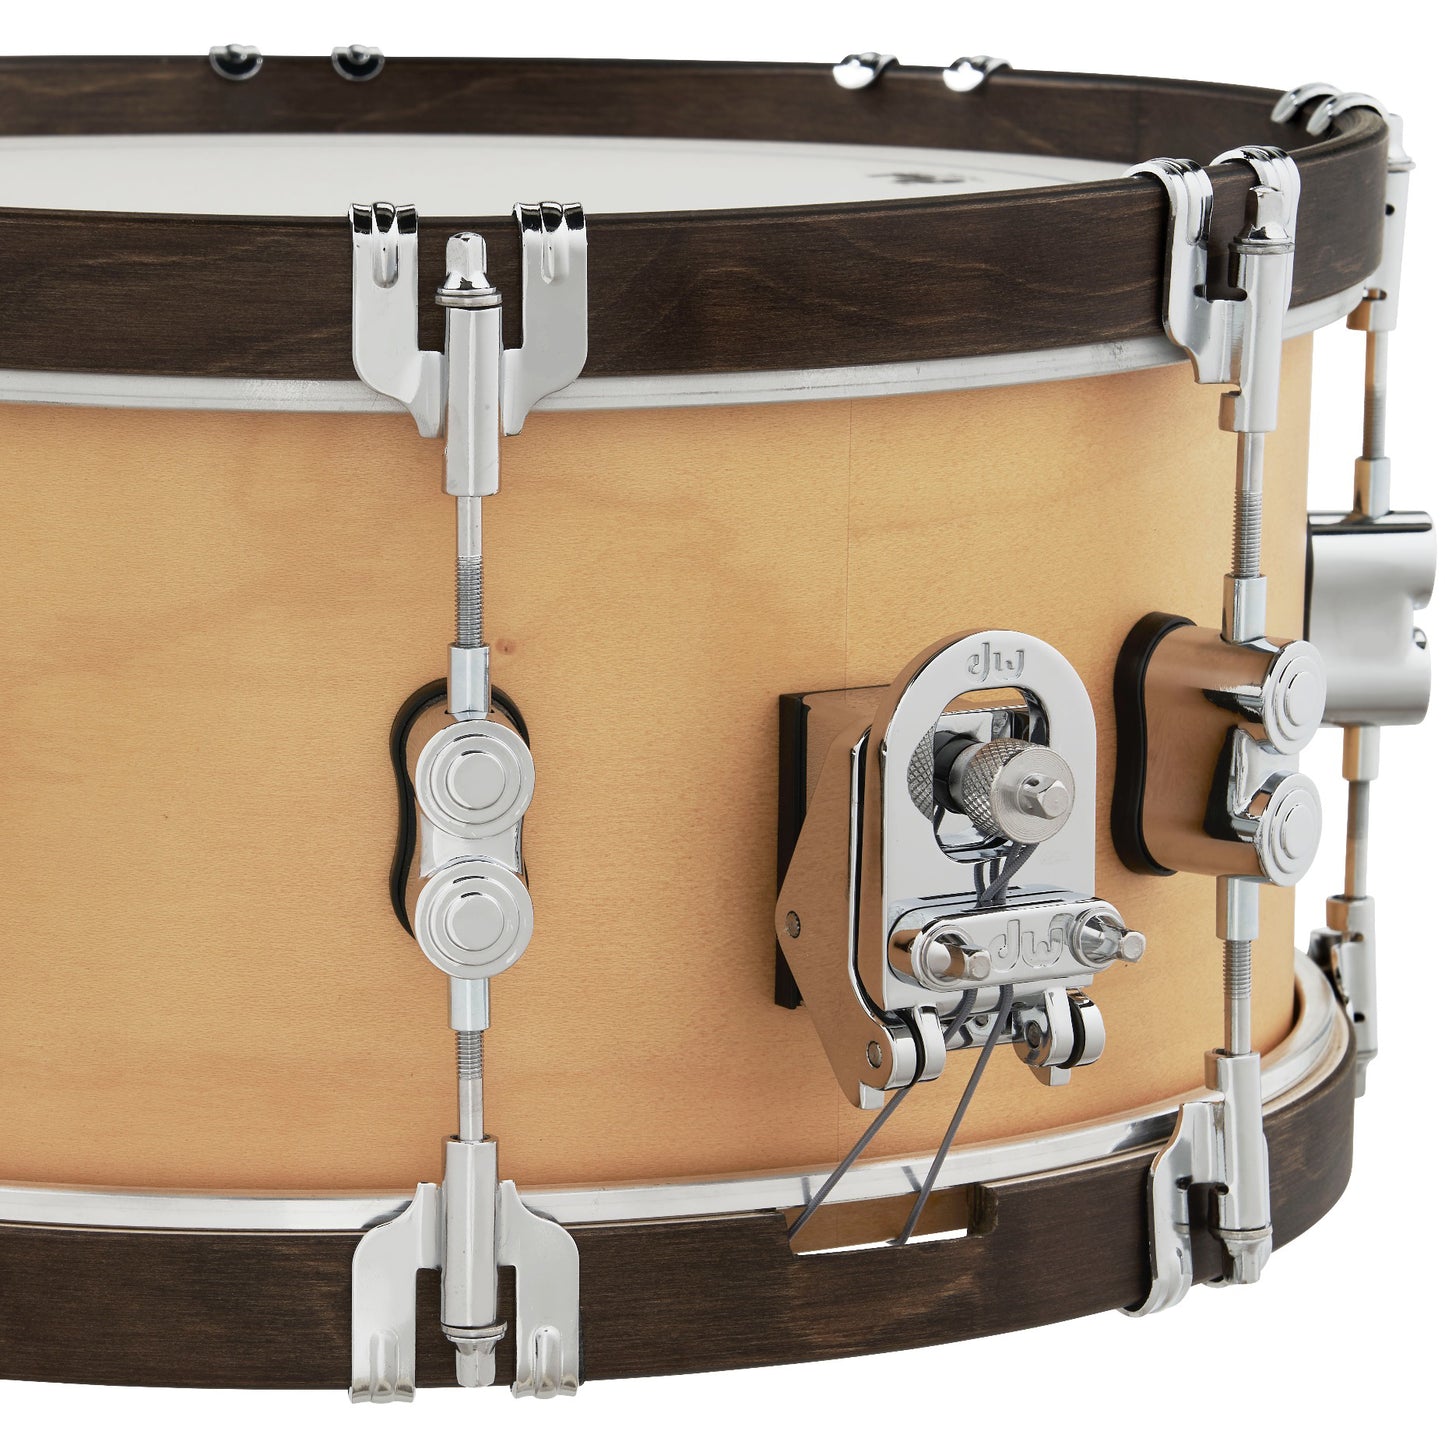 Pacific Drums & Percussion Concept Classic 6.5x14 - Natural Stain